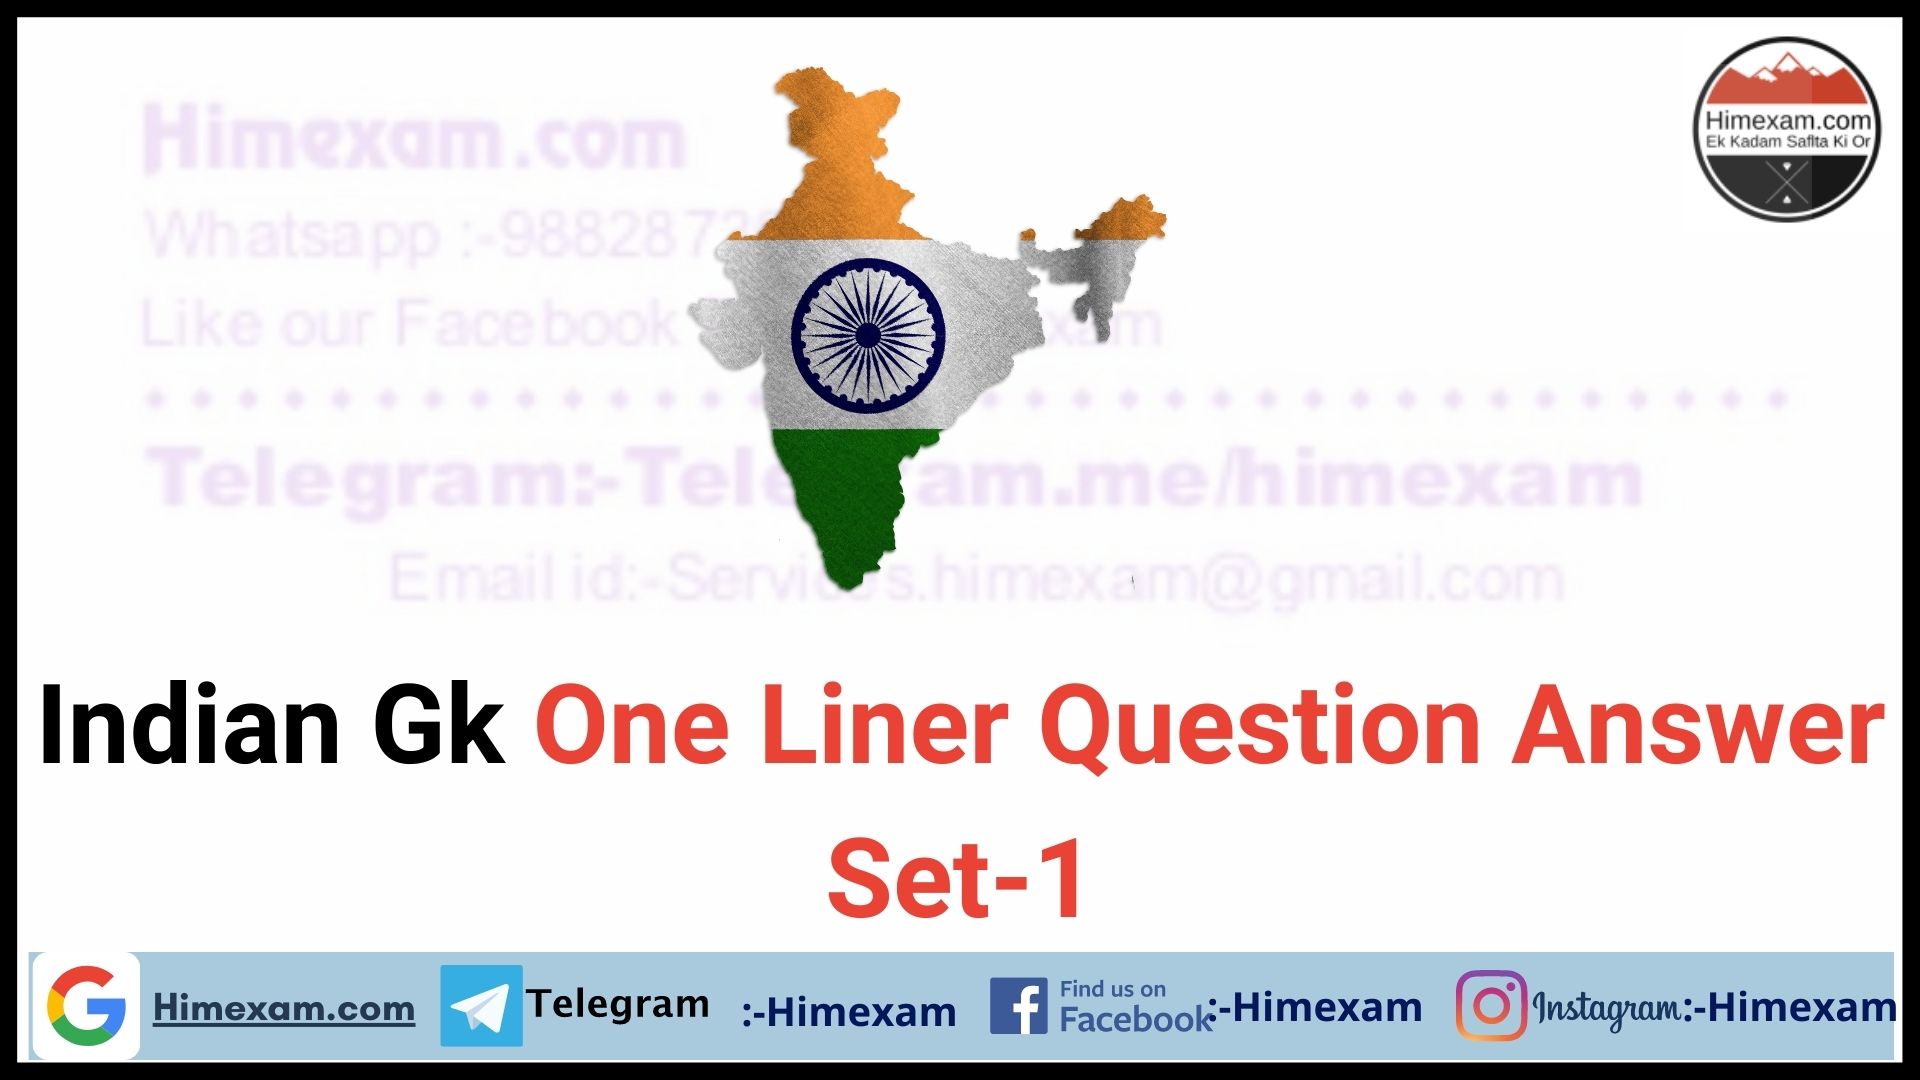 Indian Gk One Liner Question Answer Set-1